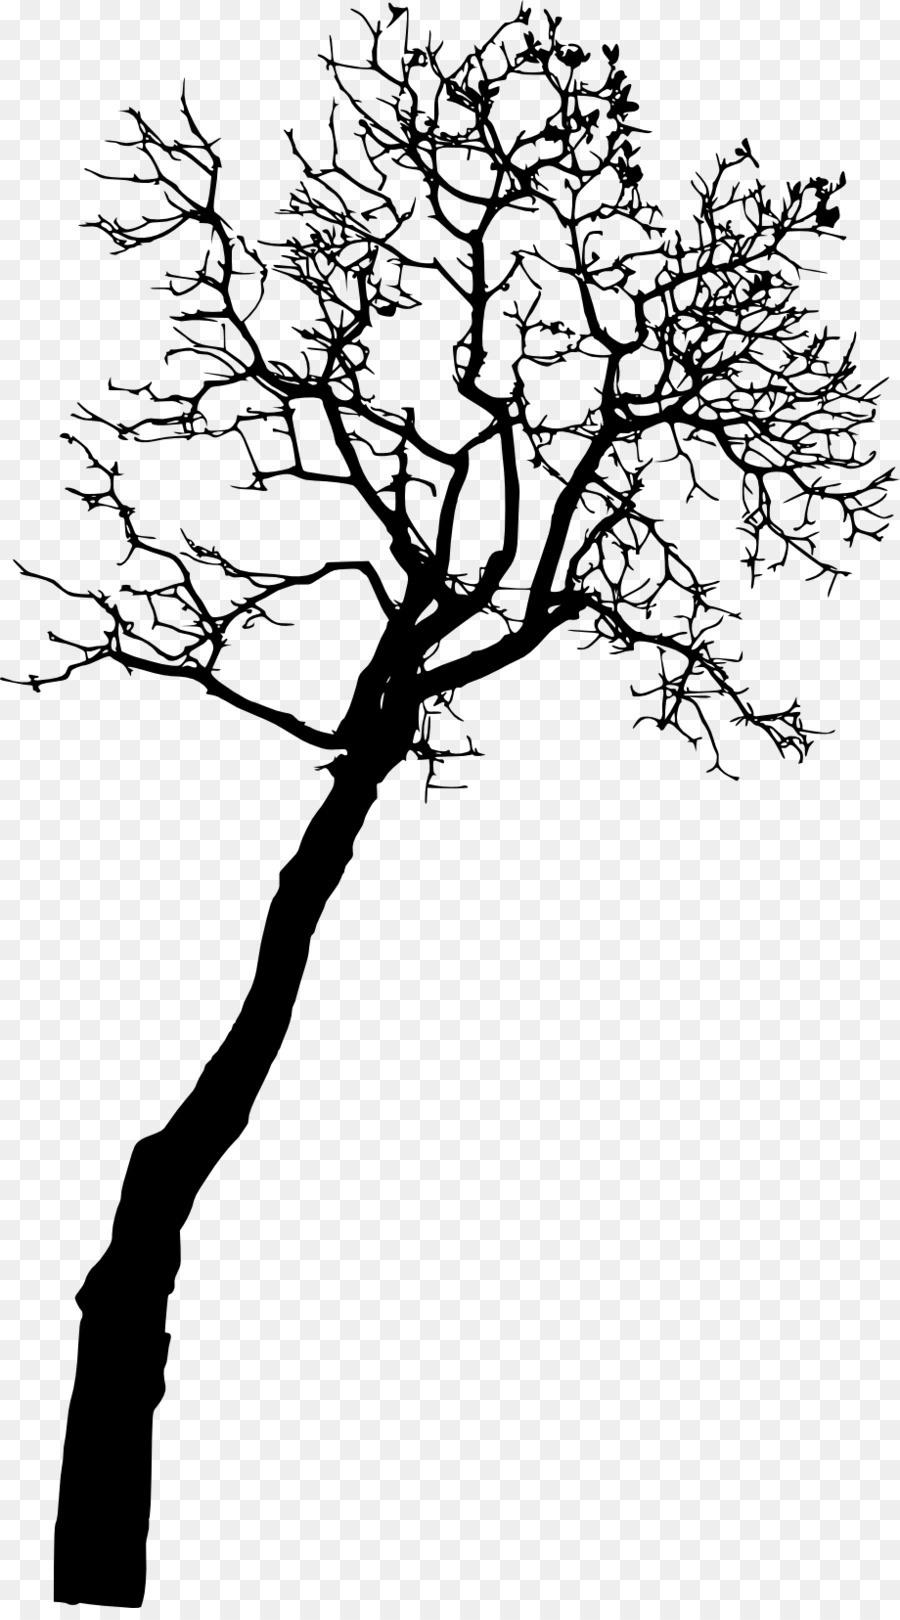 Tree Photography - tree silhouette png download - 920*1644 - Free Transparent Tree png Download.